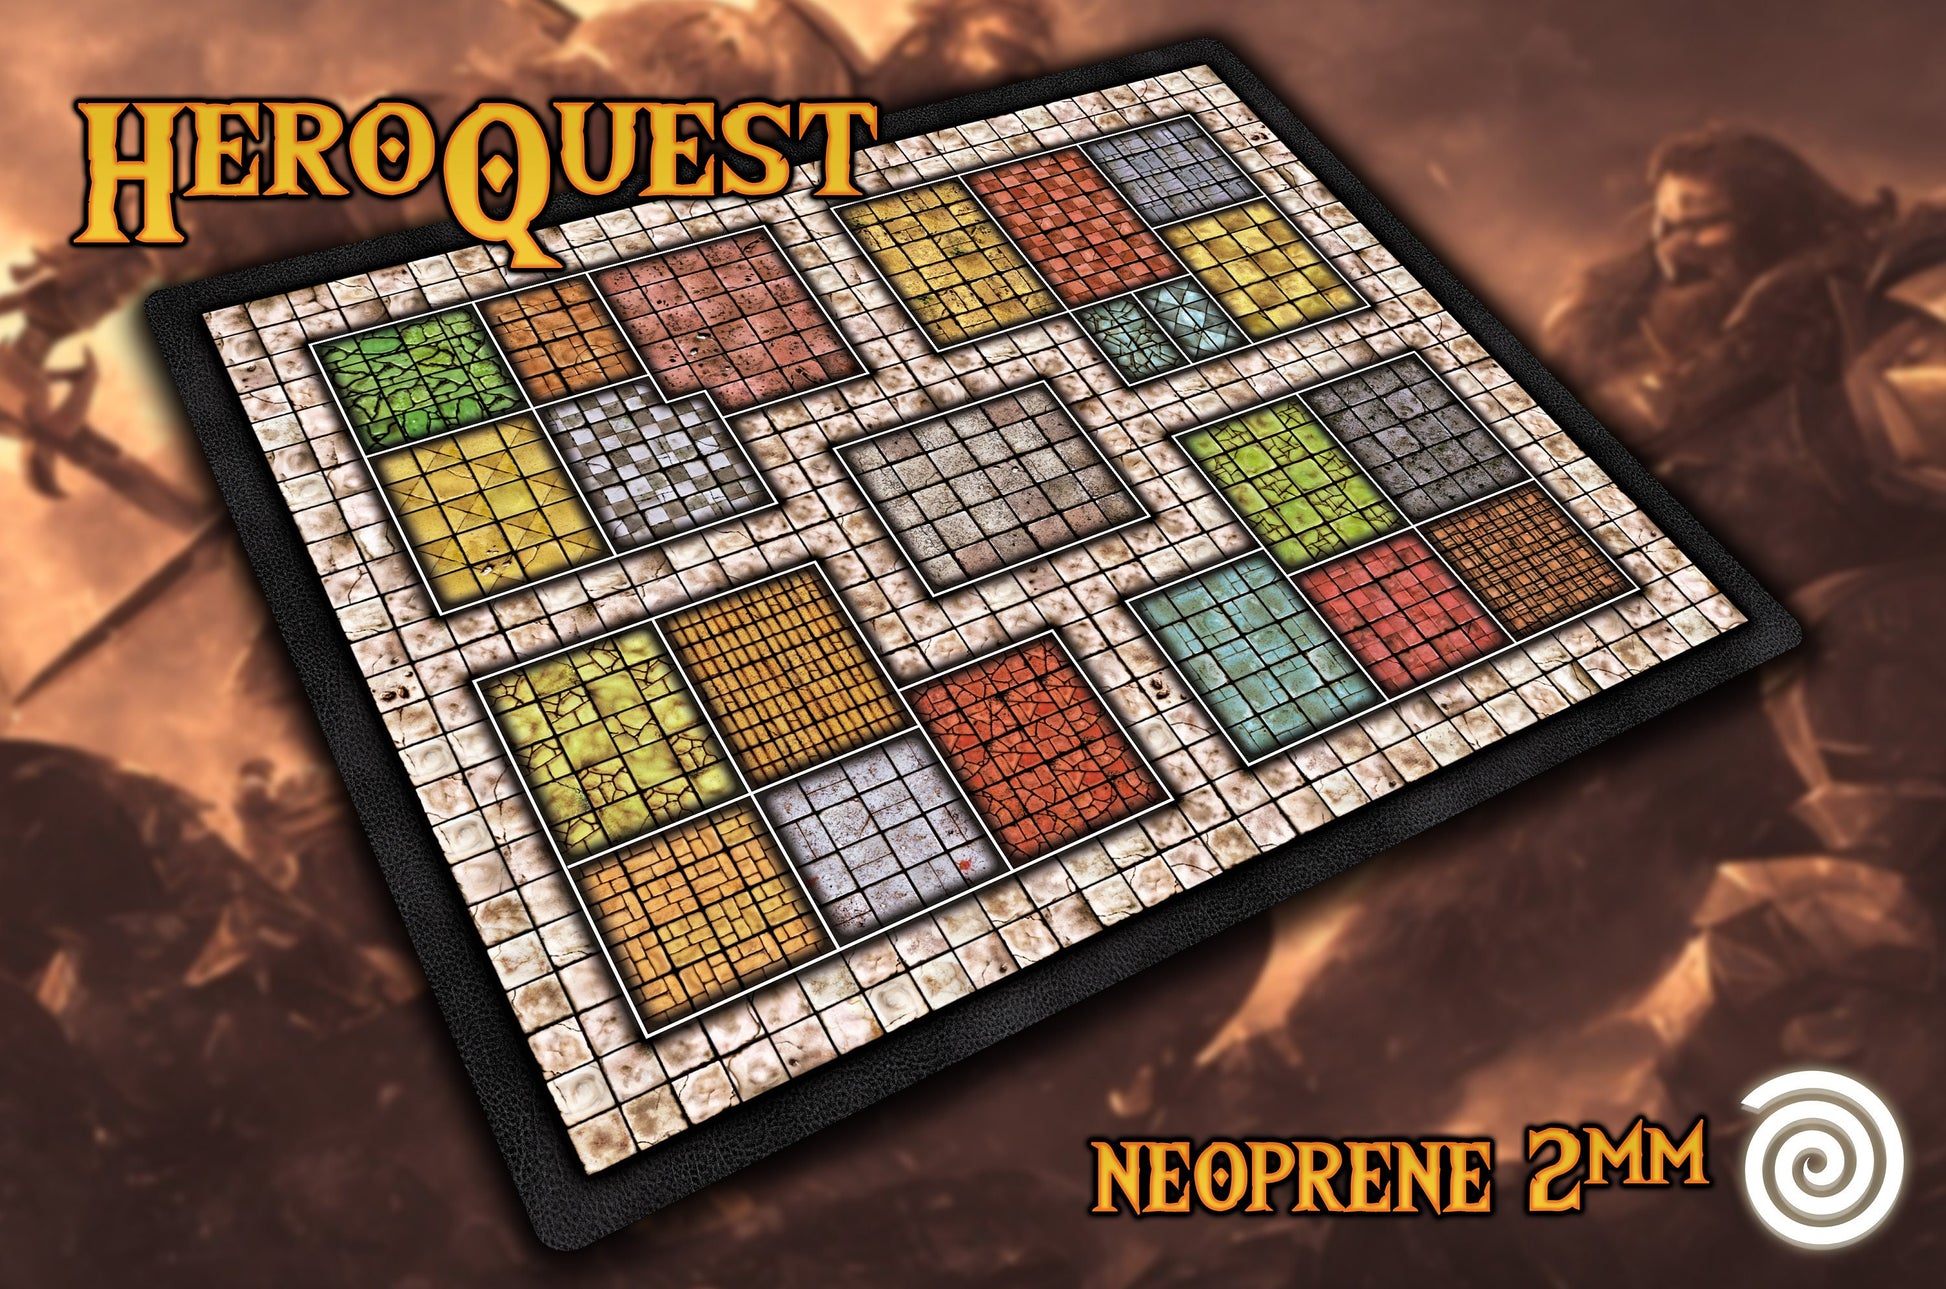 Tapete especial Remake para HeroQuest ( 2 pasillos)UNOFFICIAL PRODUCT